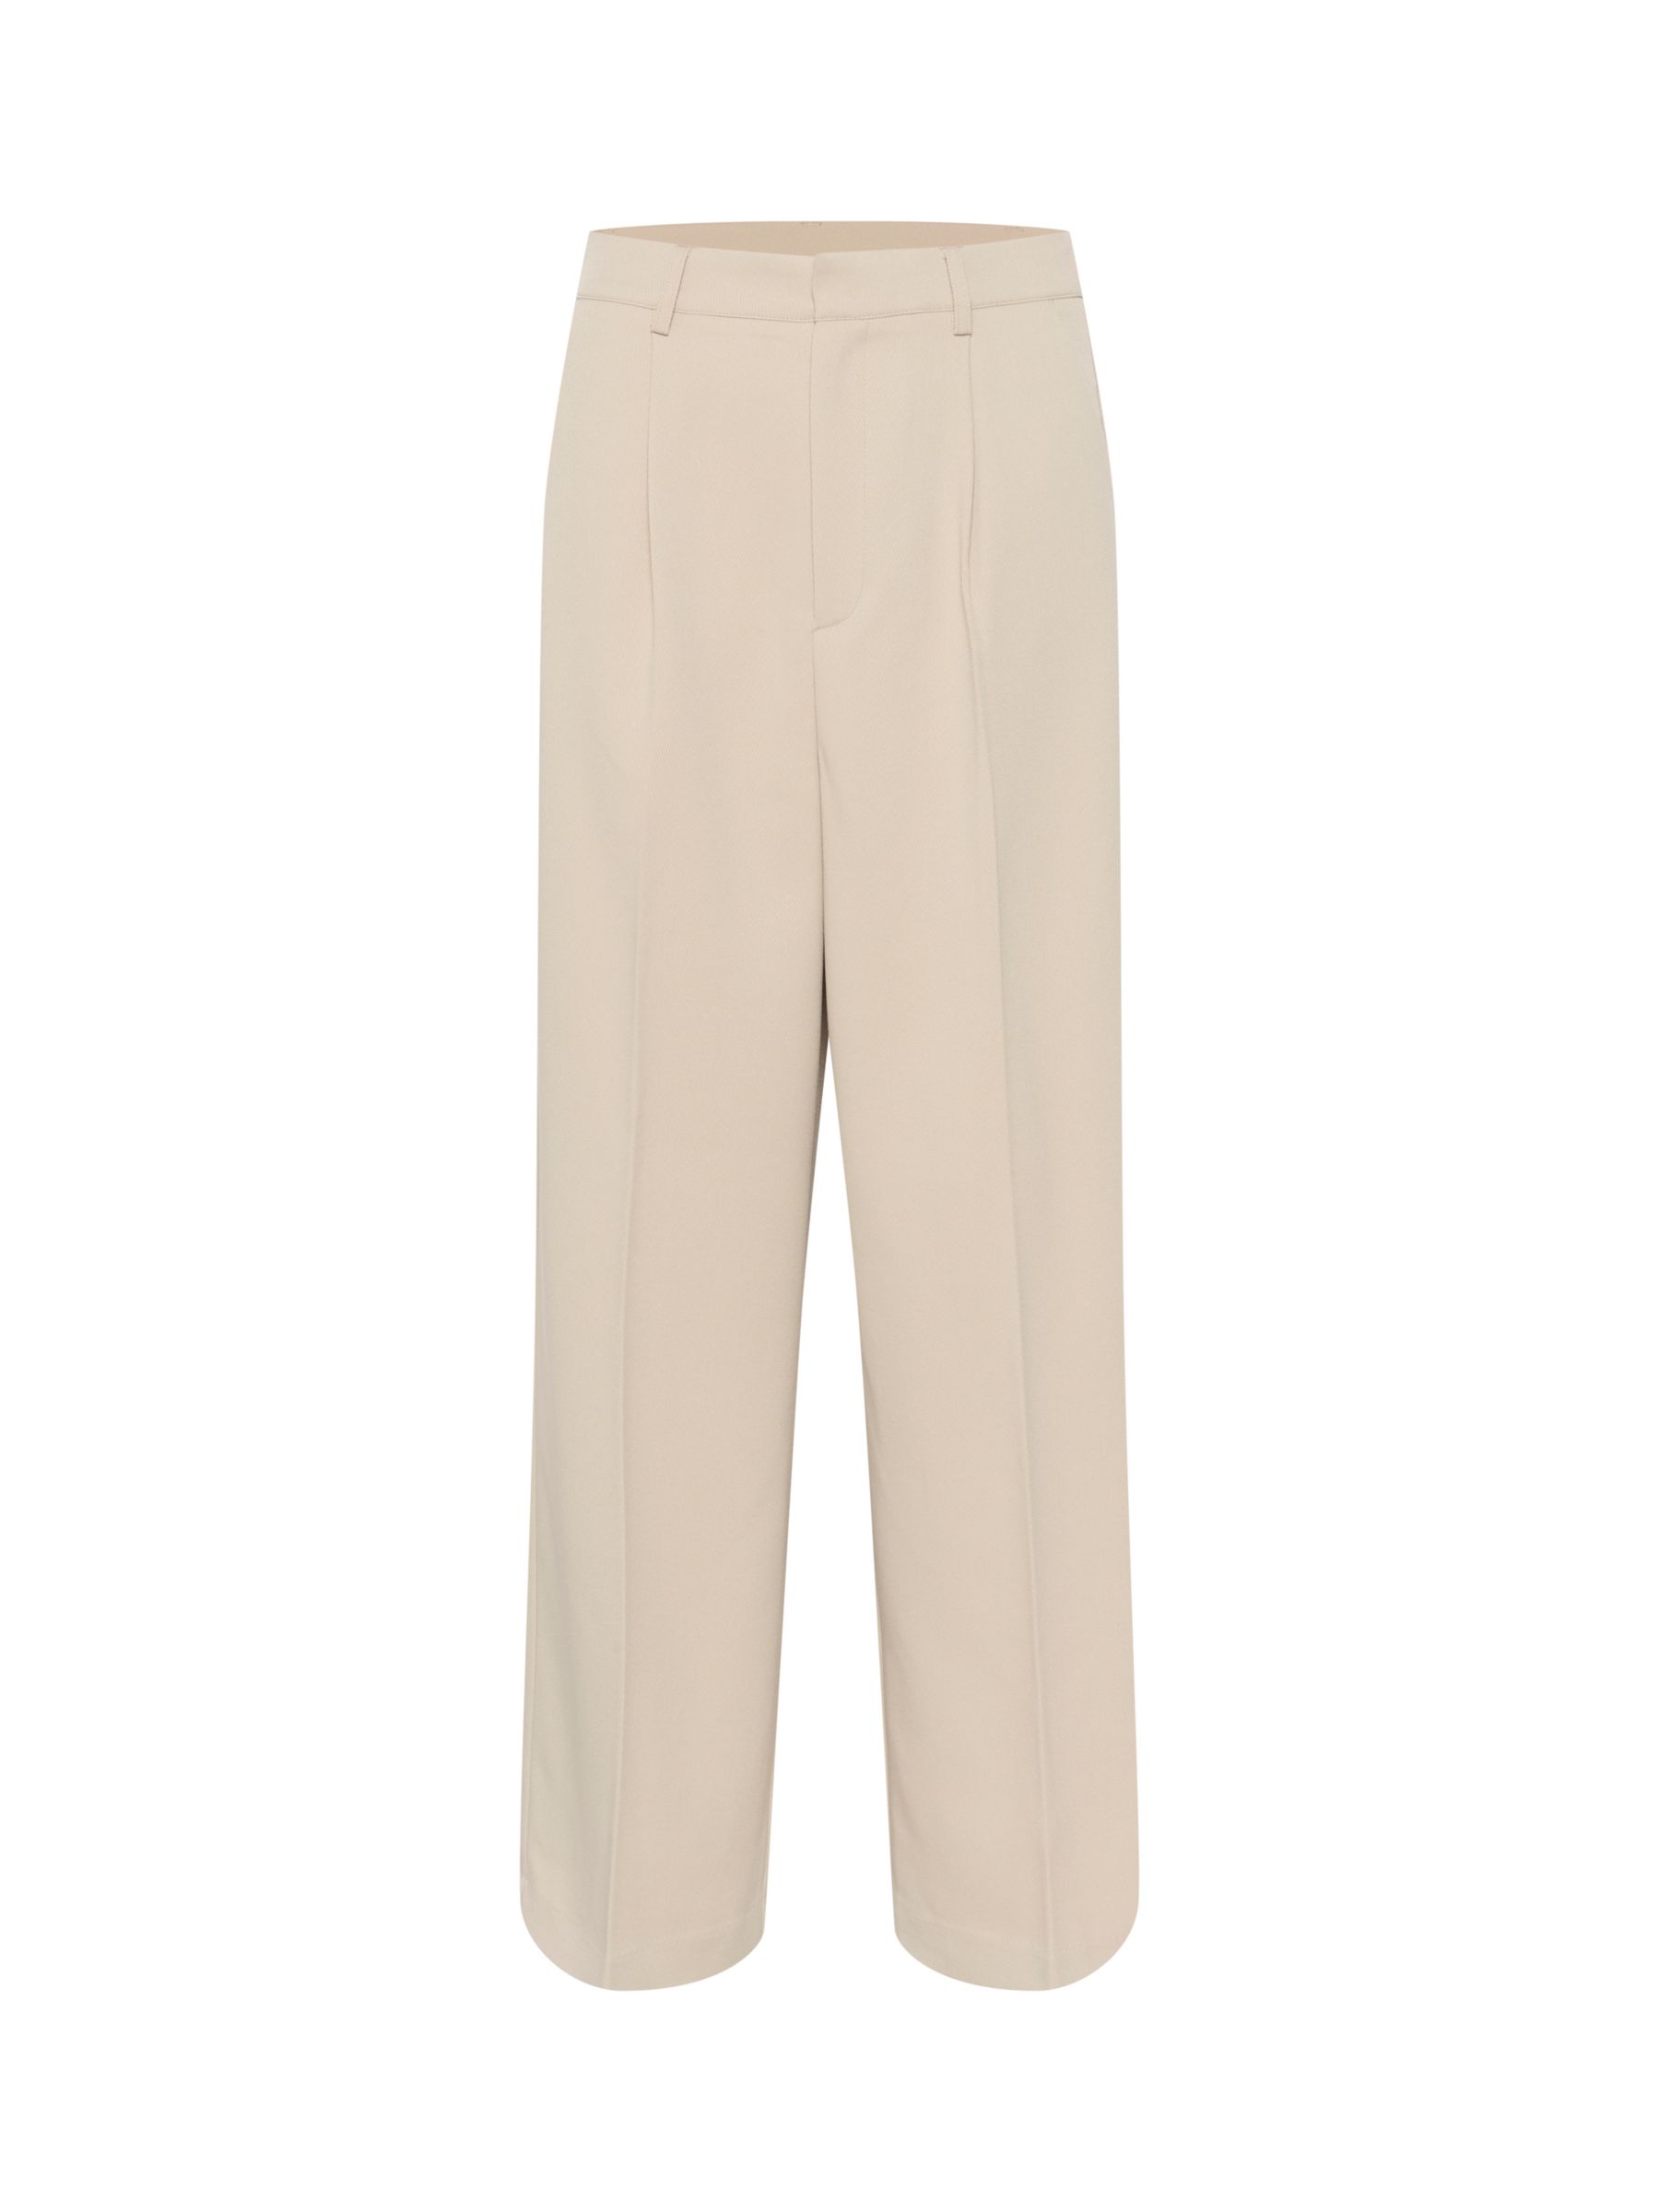 Buy KAFFE Elona High-Waisted Wide Leg Trousers, Feather Gray Online at johnlewis.com